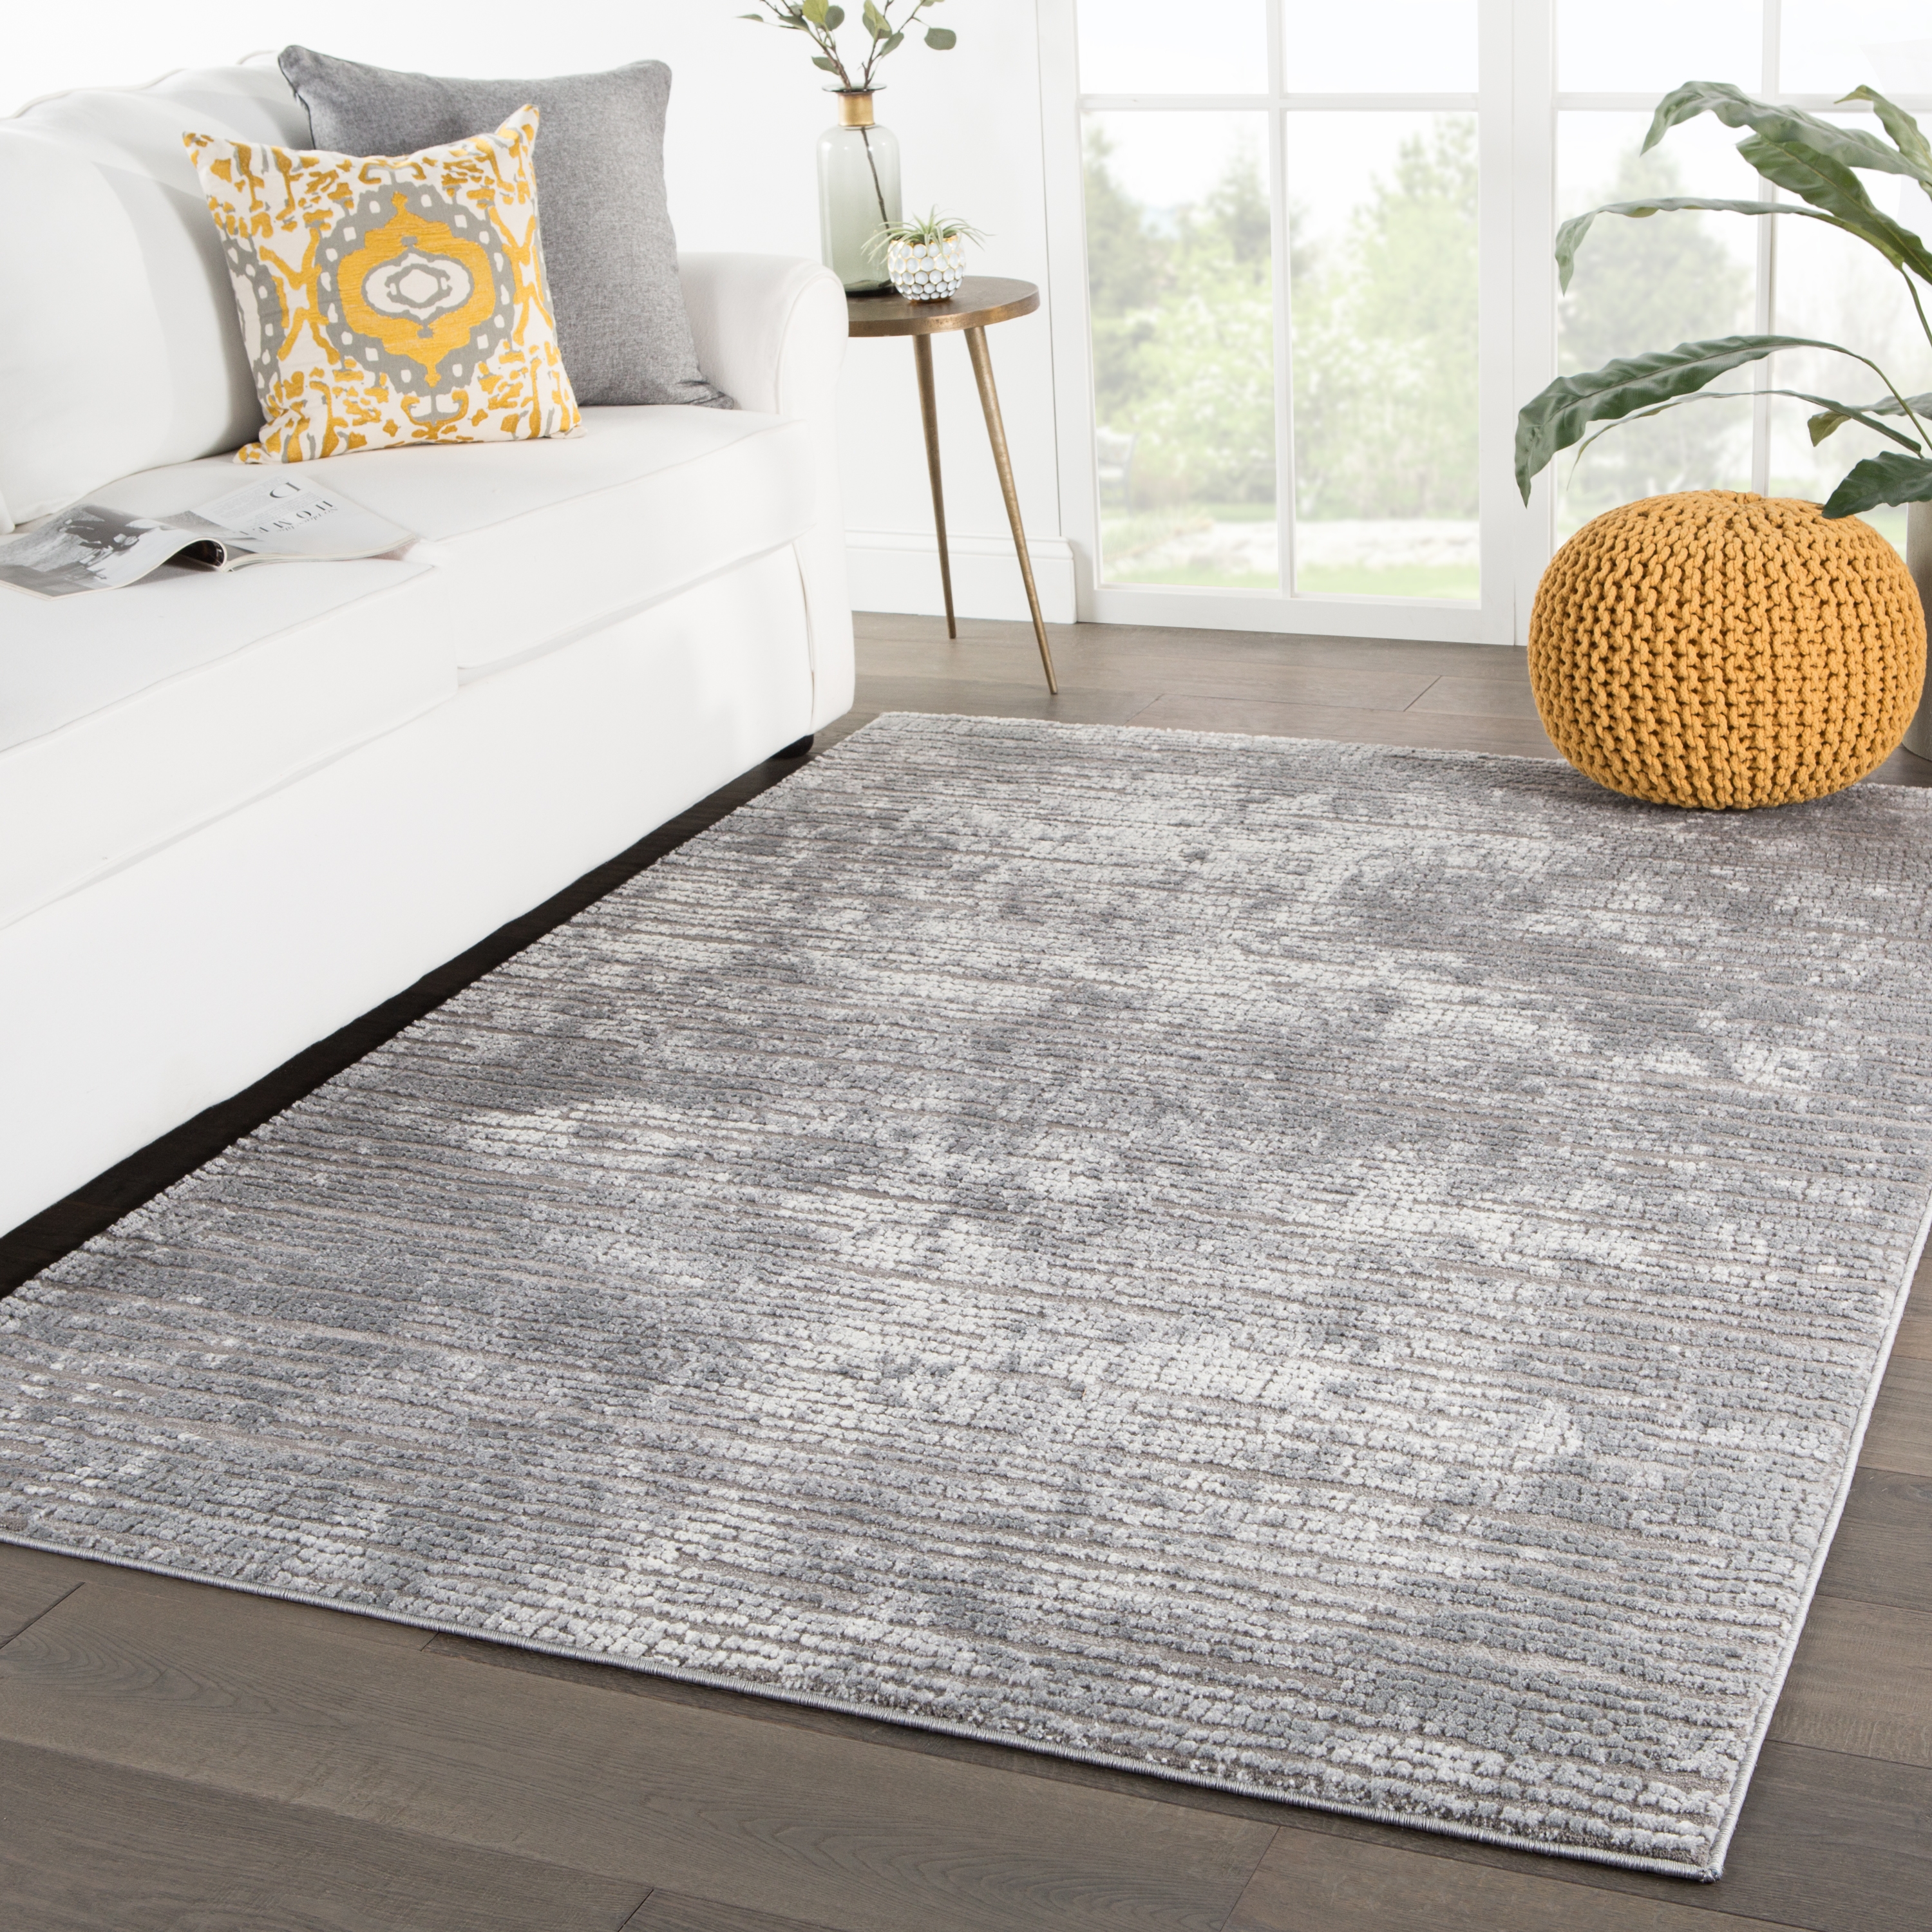 Violen Abstract Gray/ White Area Rug (8'10"X12') - Image 4